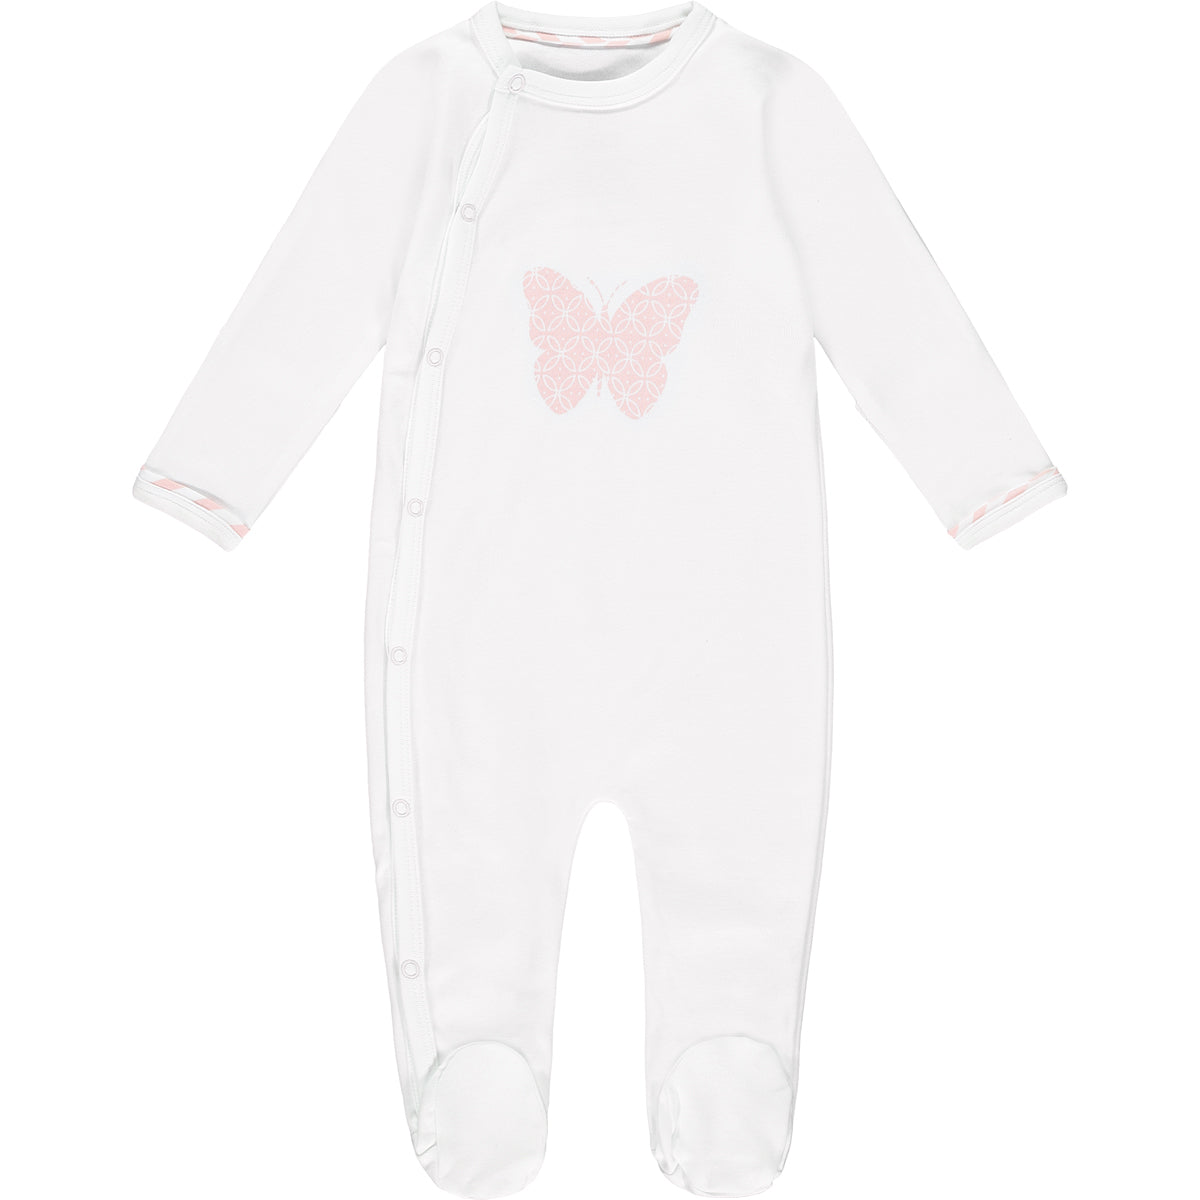 Lily Storytime Romper White & Pink